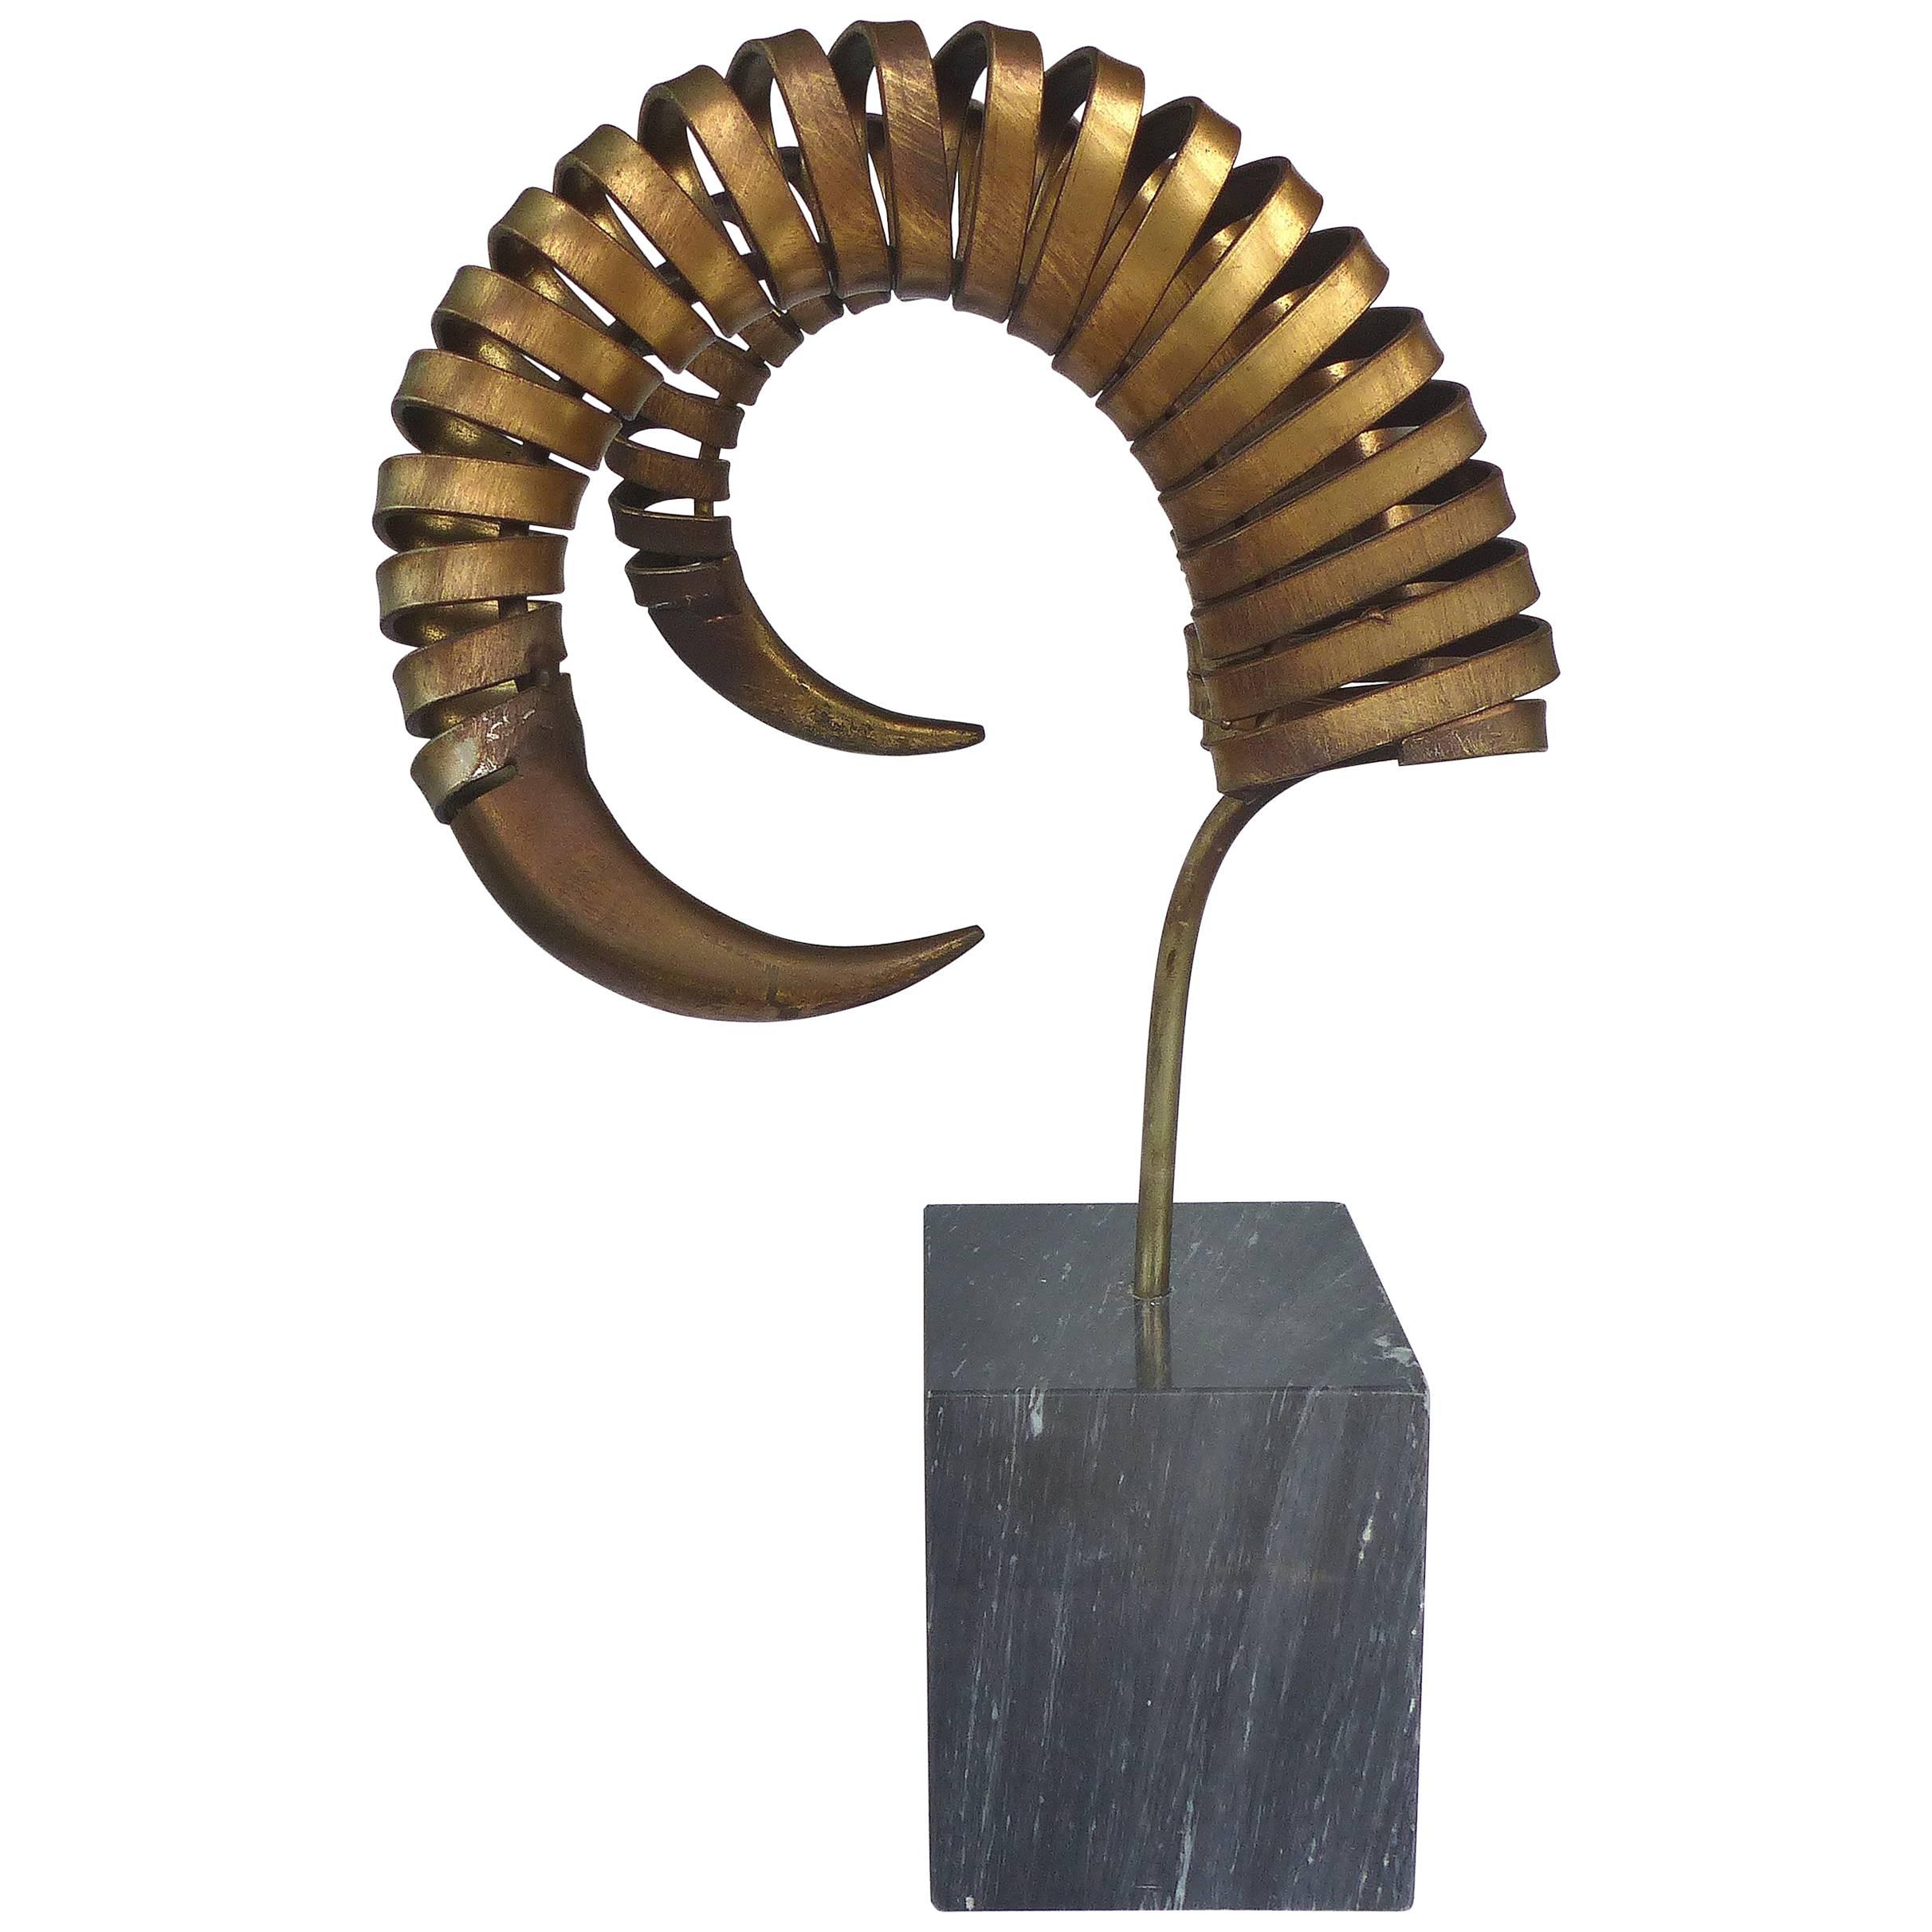 C. Jere Ram's Horn Sculpture on Marble Base, Twice Signed and Dated, 1983